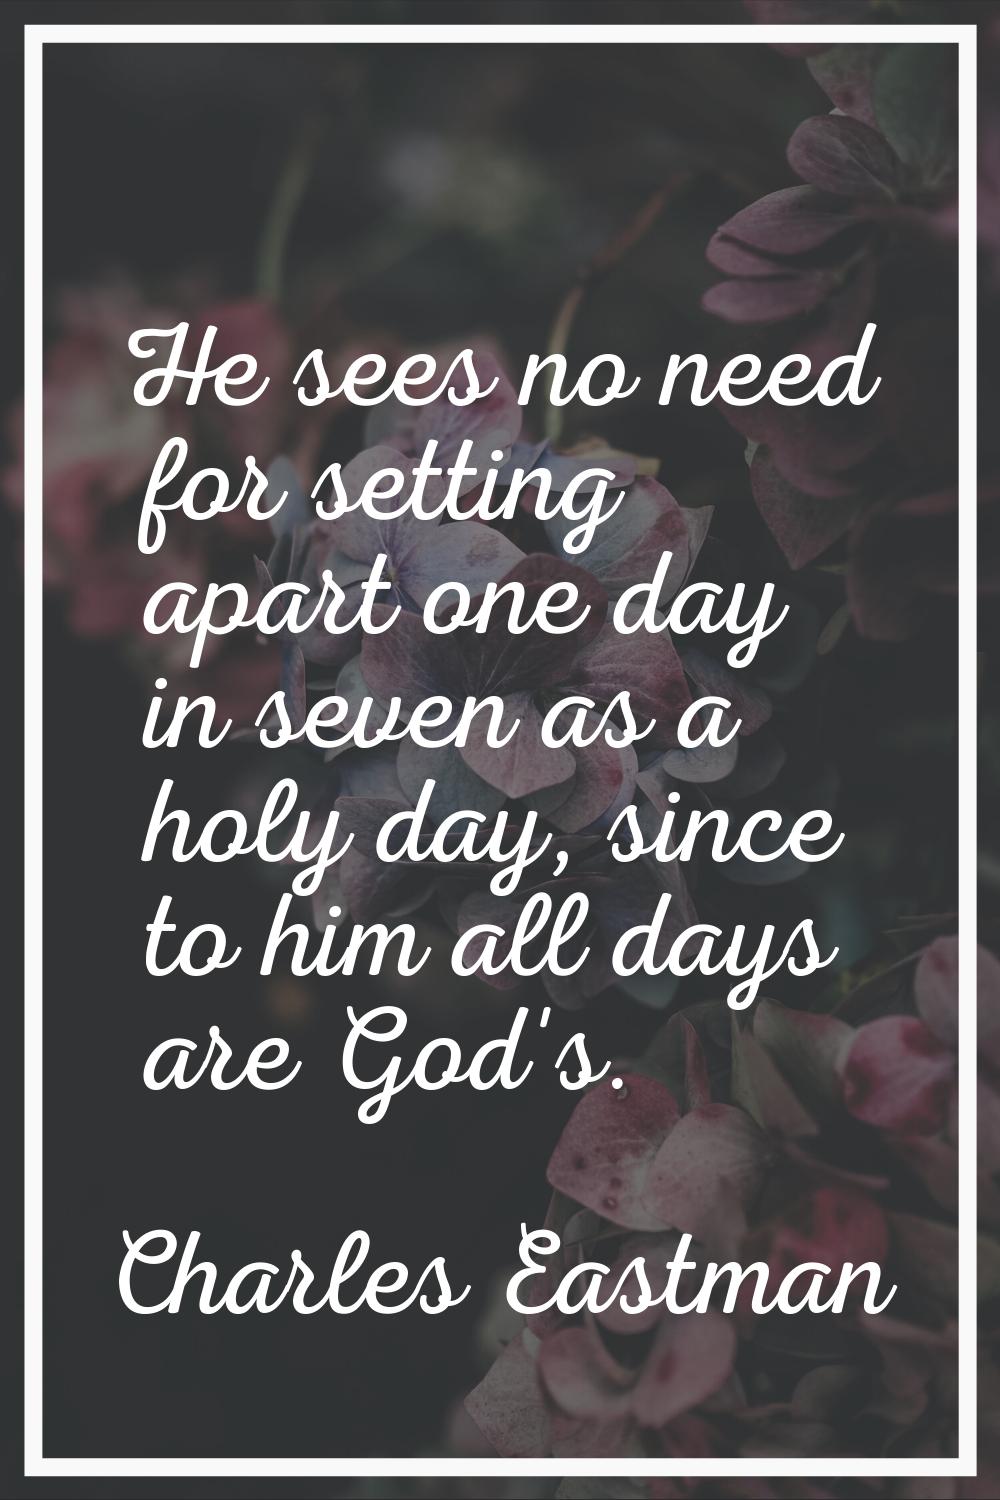 He sees no need for setting apart one day in seven as a holy day, since to him all days are God's.